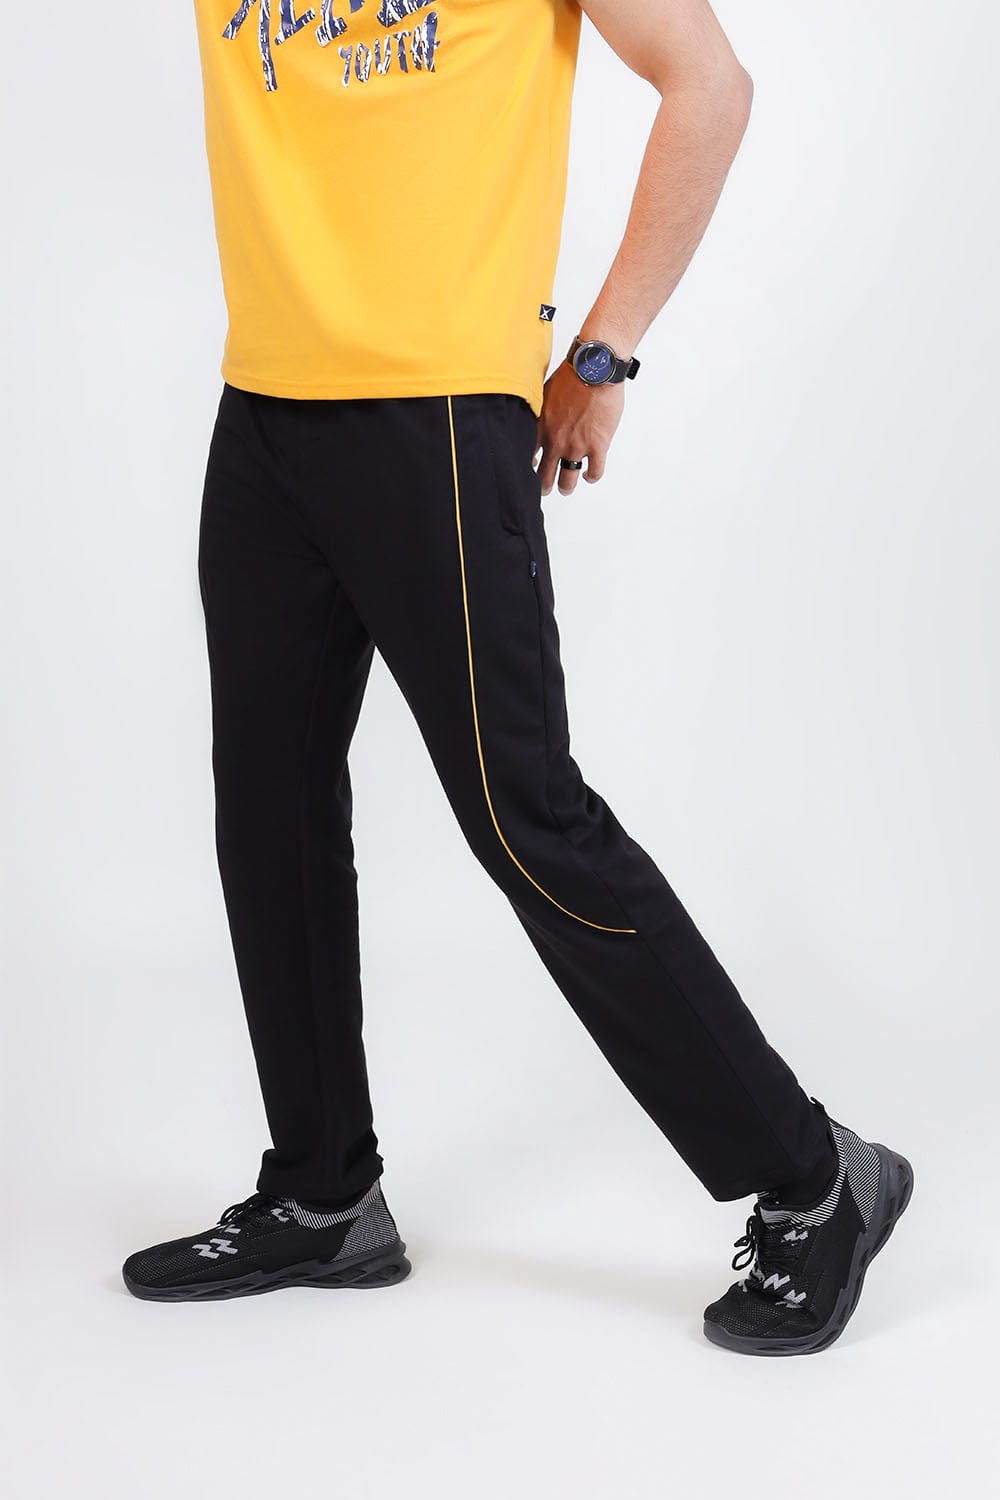 Hope Not Out by Shahid Afridi Men Trouser Man Black Fashion Trouser